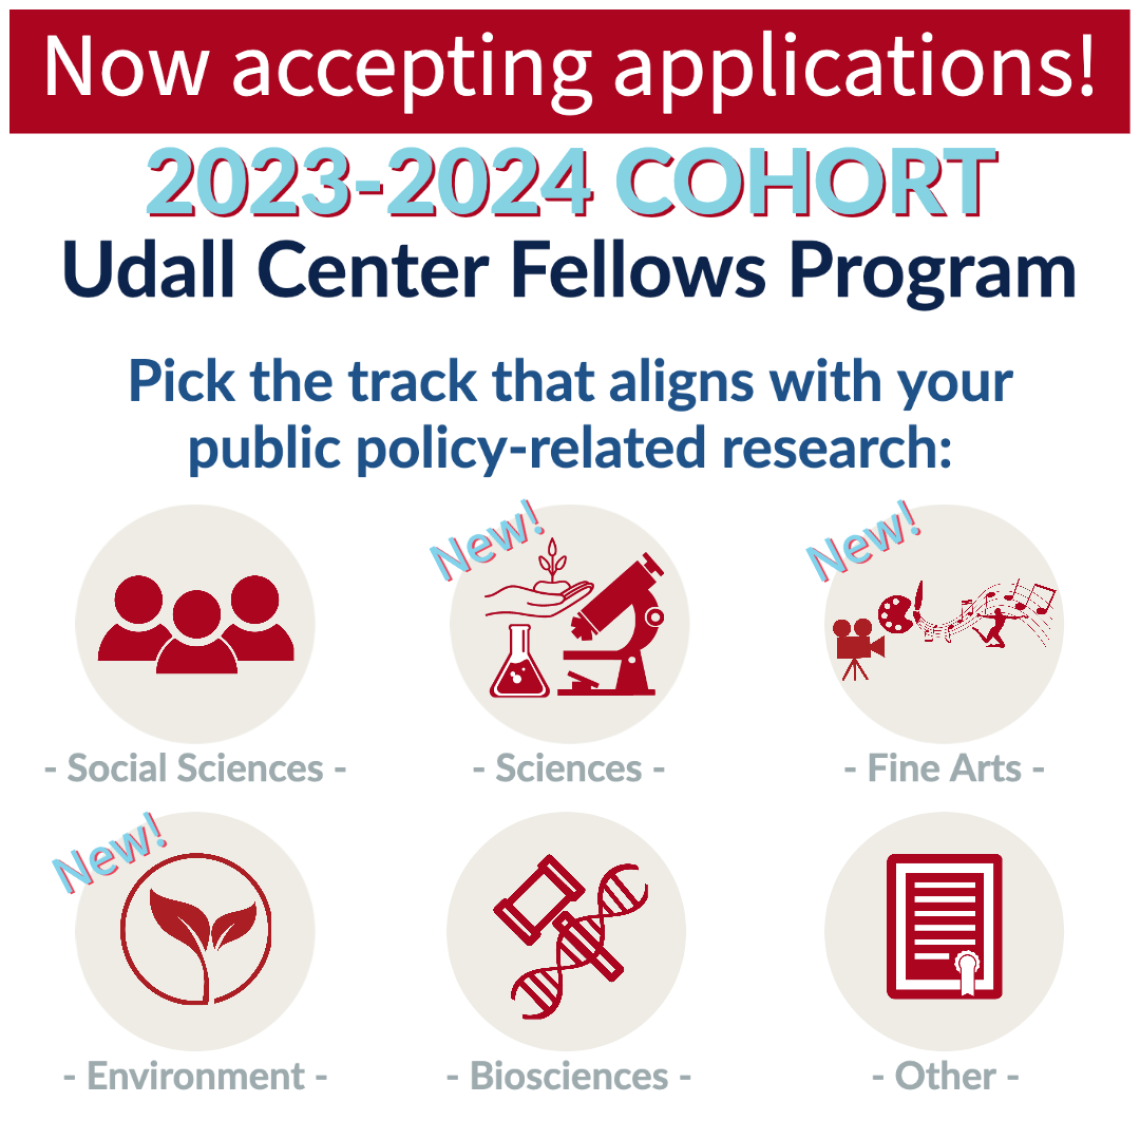 Udall Fellows can apply for one of six research tracks: social science, sciences, fine arts, environment, biosciences, and there is a catch-all category for other types of research